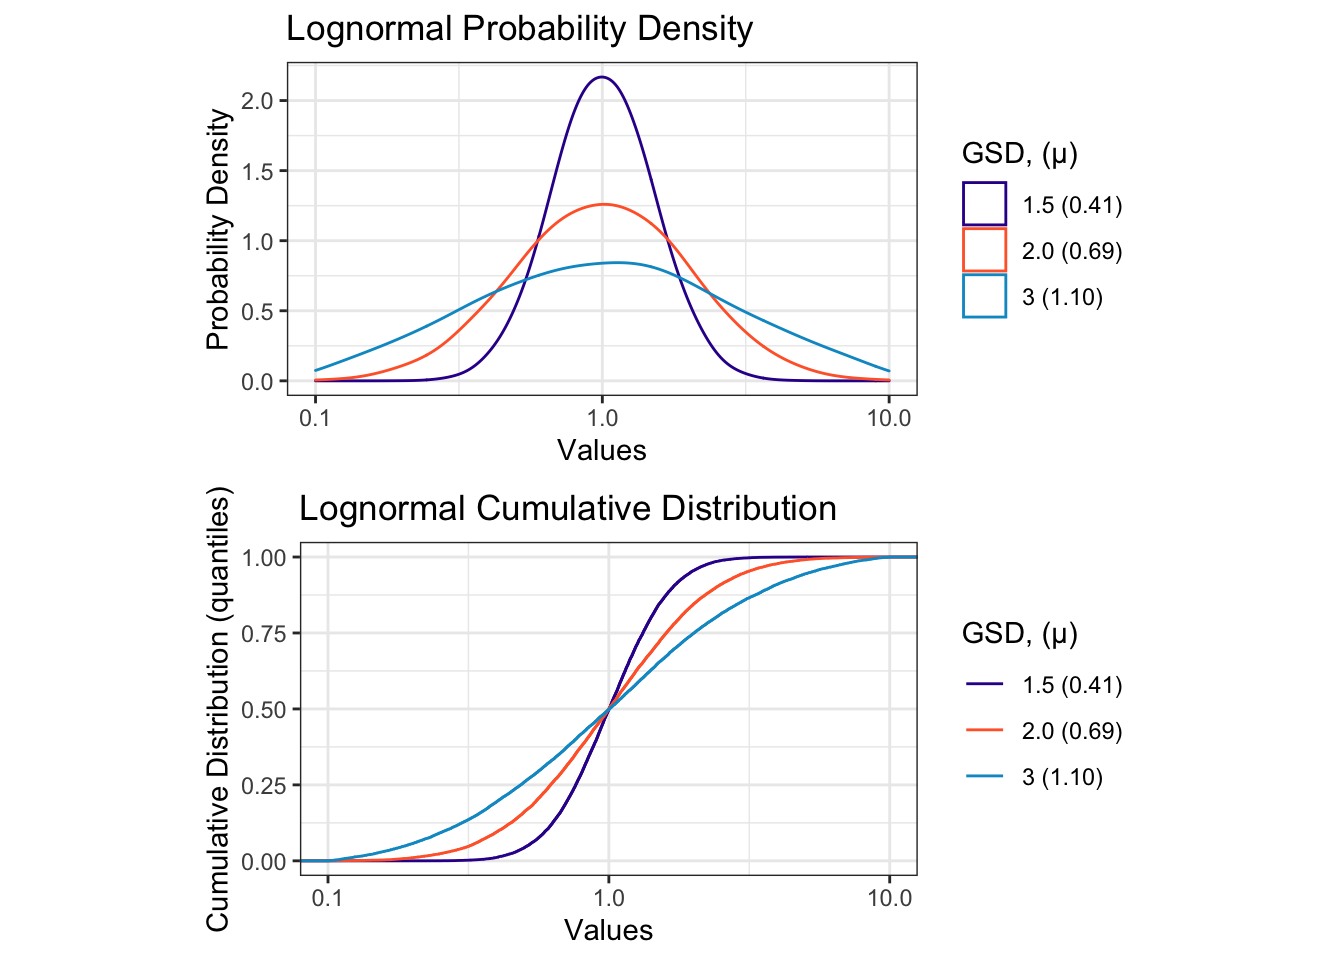 Lognormal Distributions look "normal" when plotted on a log scale axis.